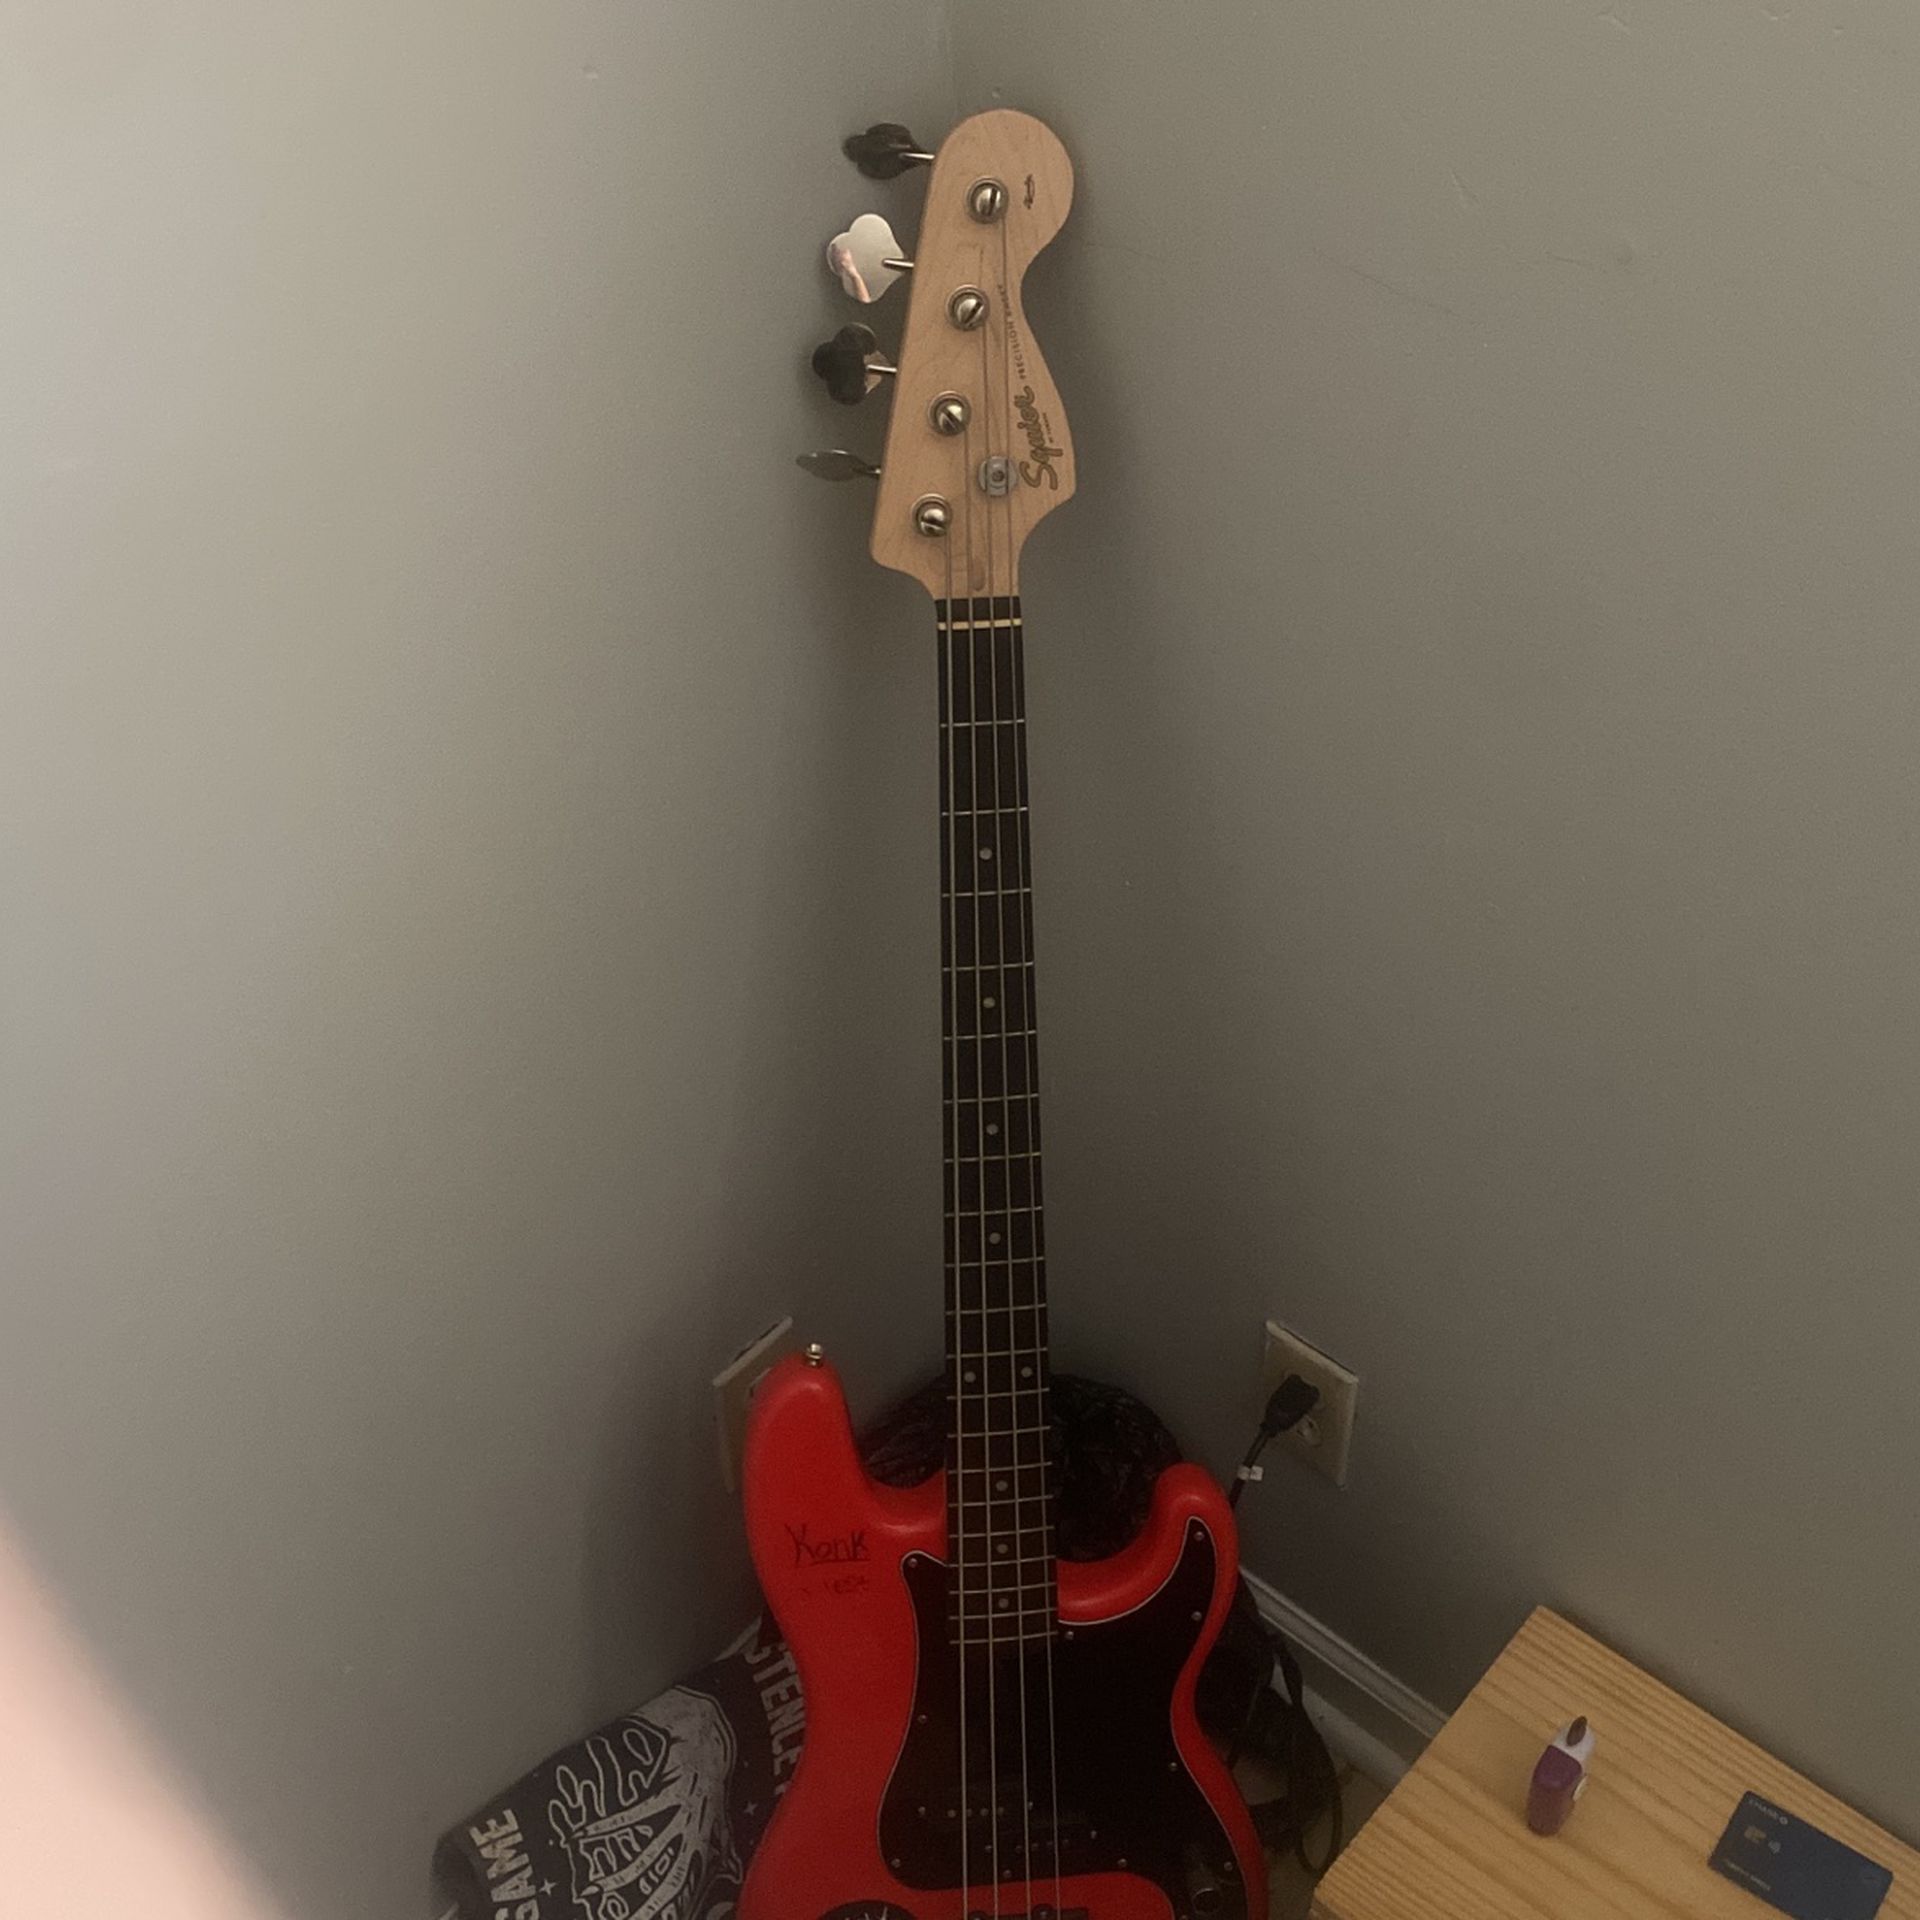 Bass And Amp (Squire Bass peavy Amp)